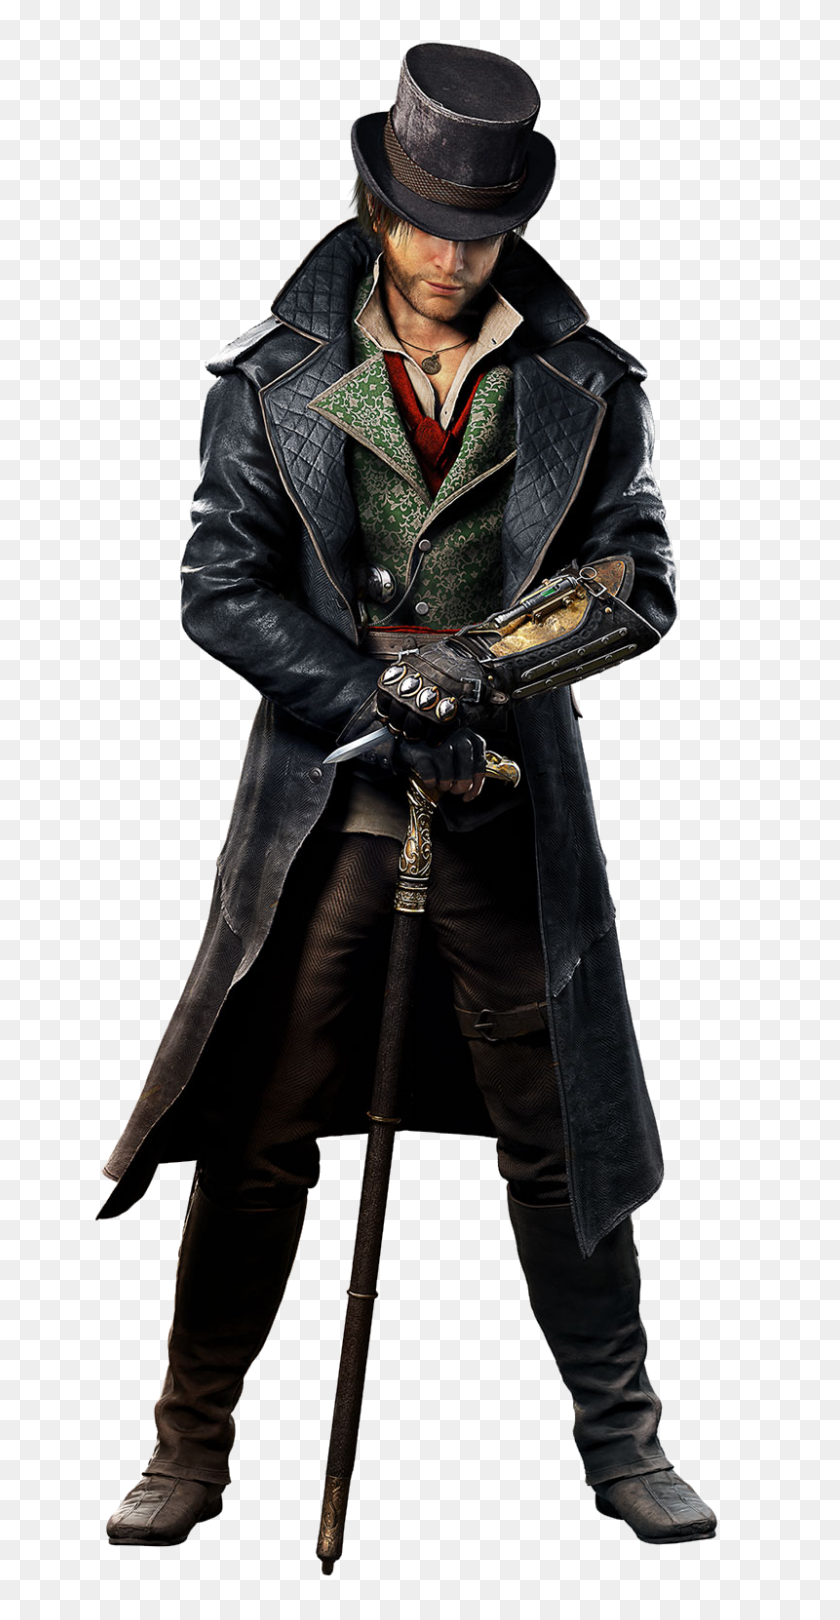 800x1600 Assassin Creed Syndicate Png Transparente Assassin Creed Syndicate - Assassins Creed Png